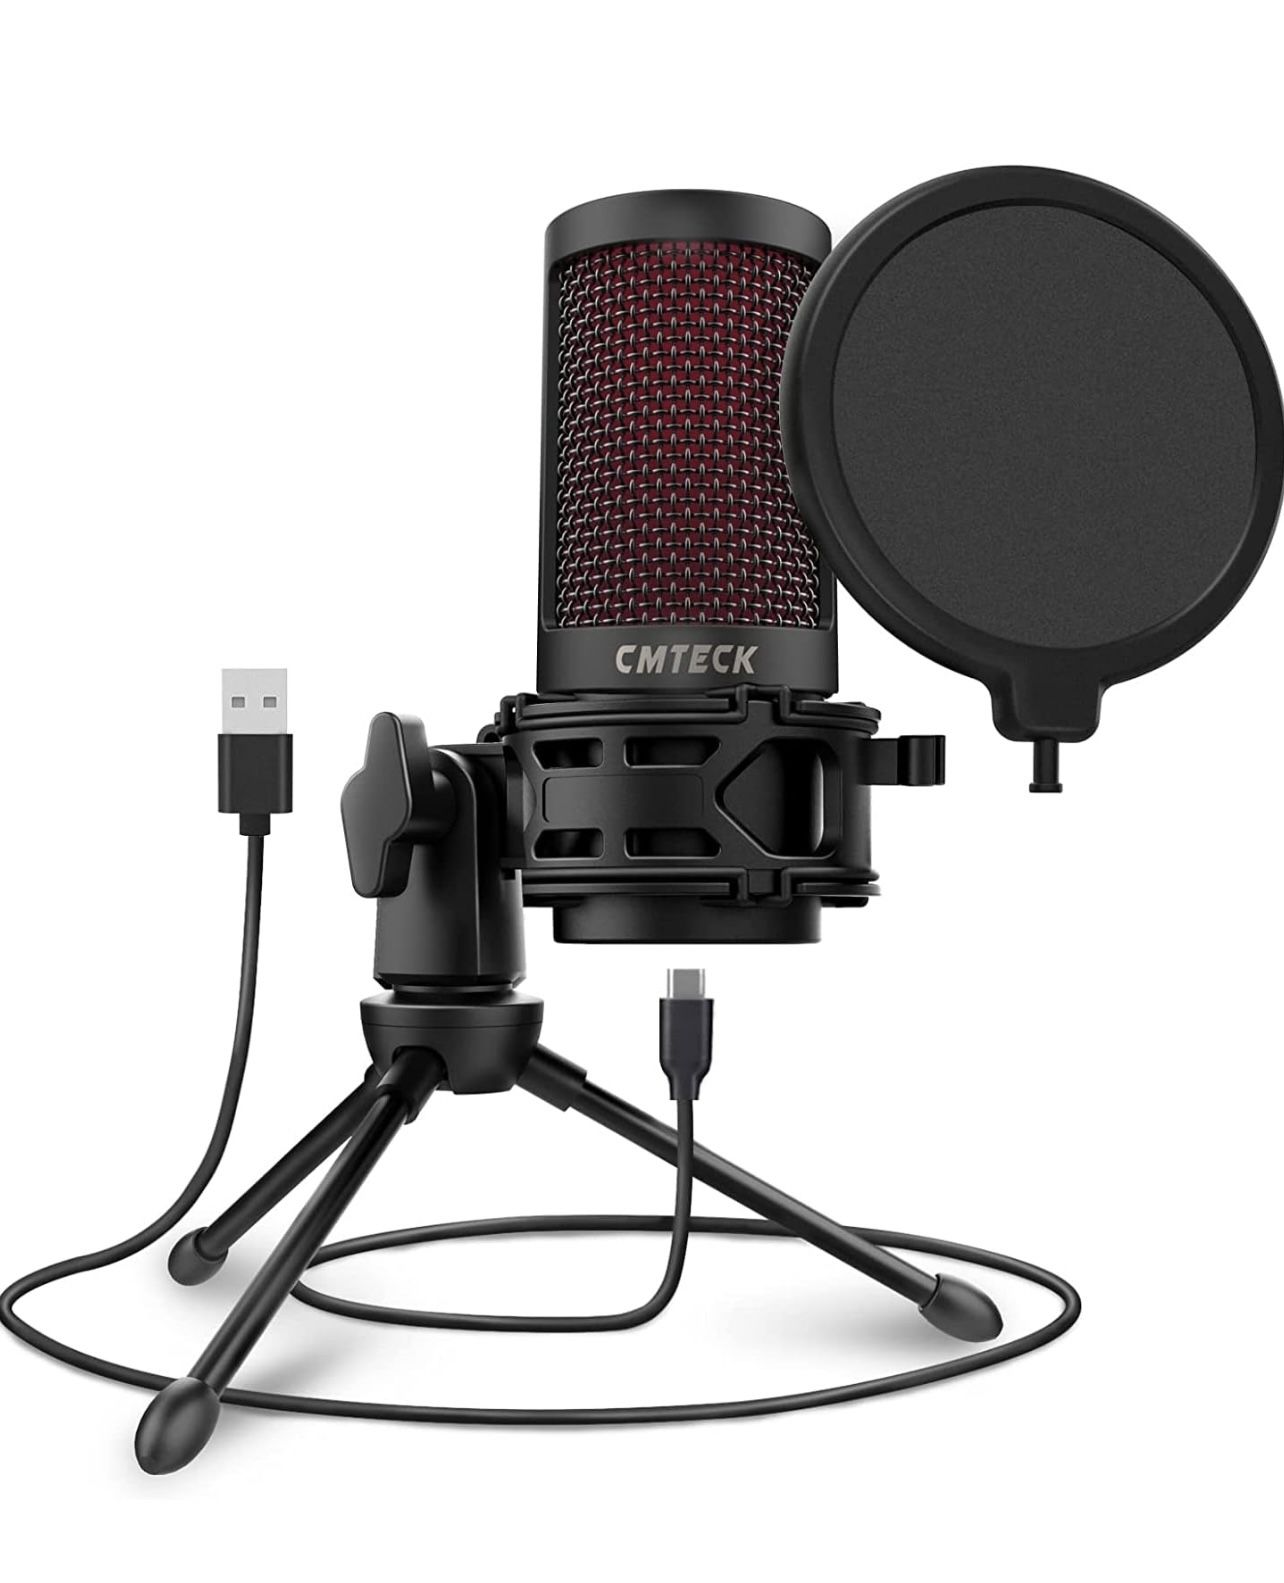 USB Microphone, Podcast Microphone with Pop Filter & Mute Button, Compatible Desktop Computer and Laptop